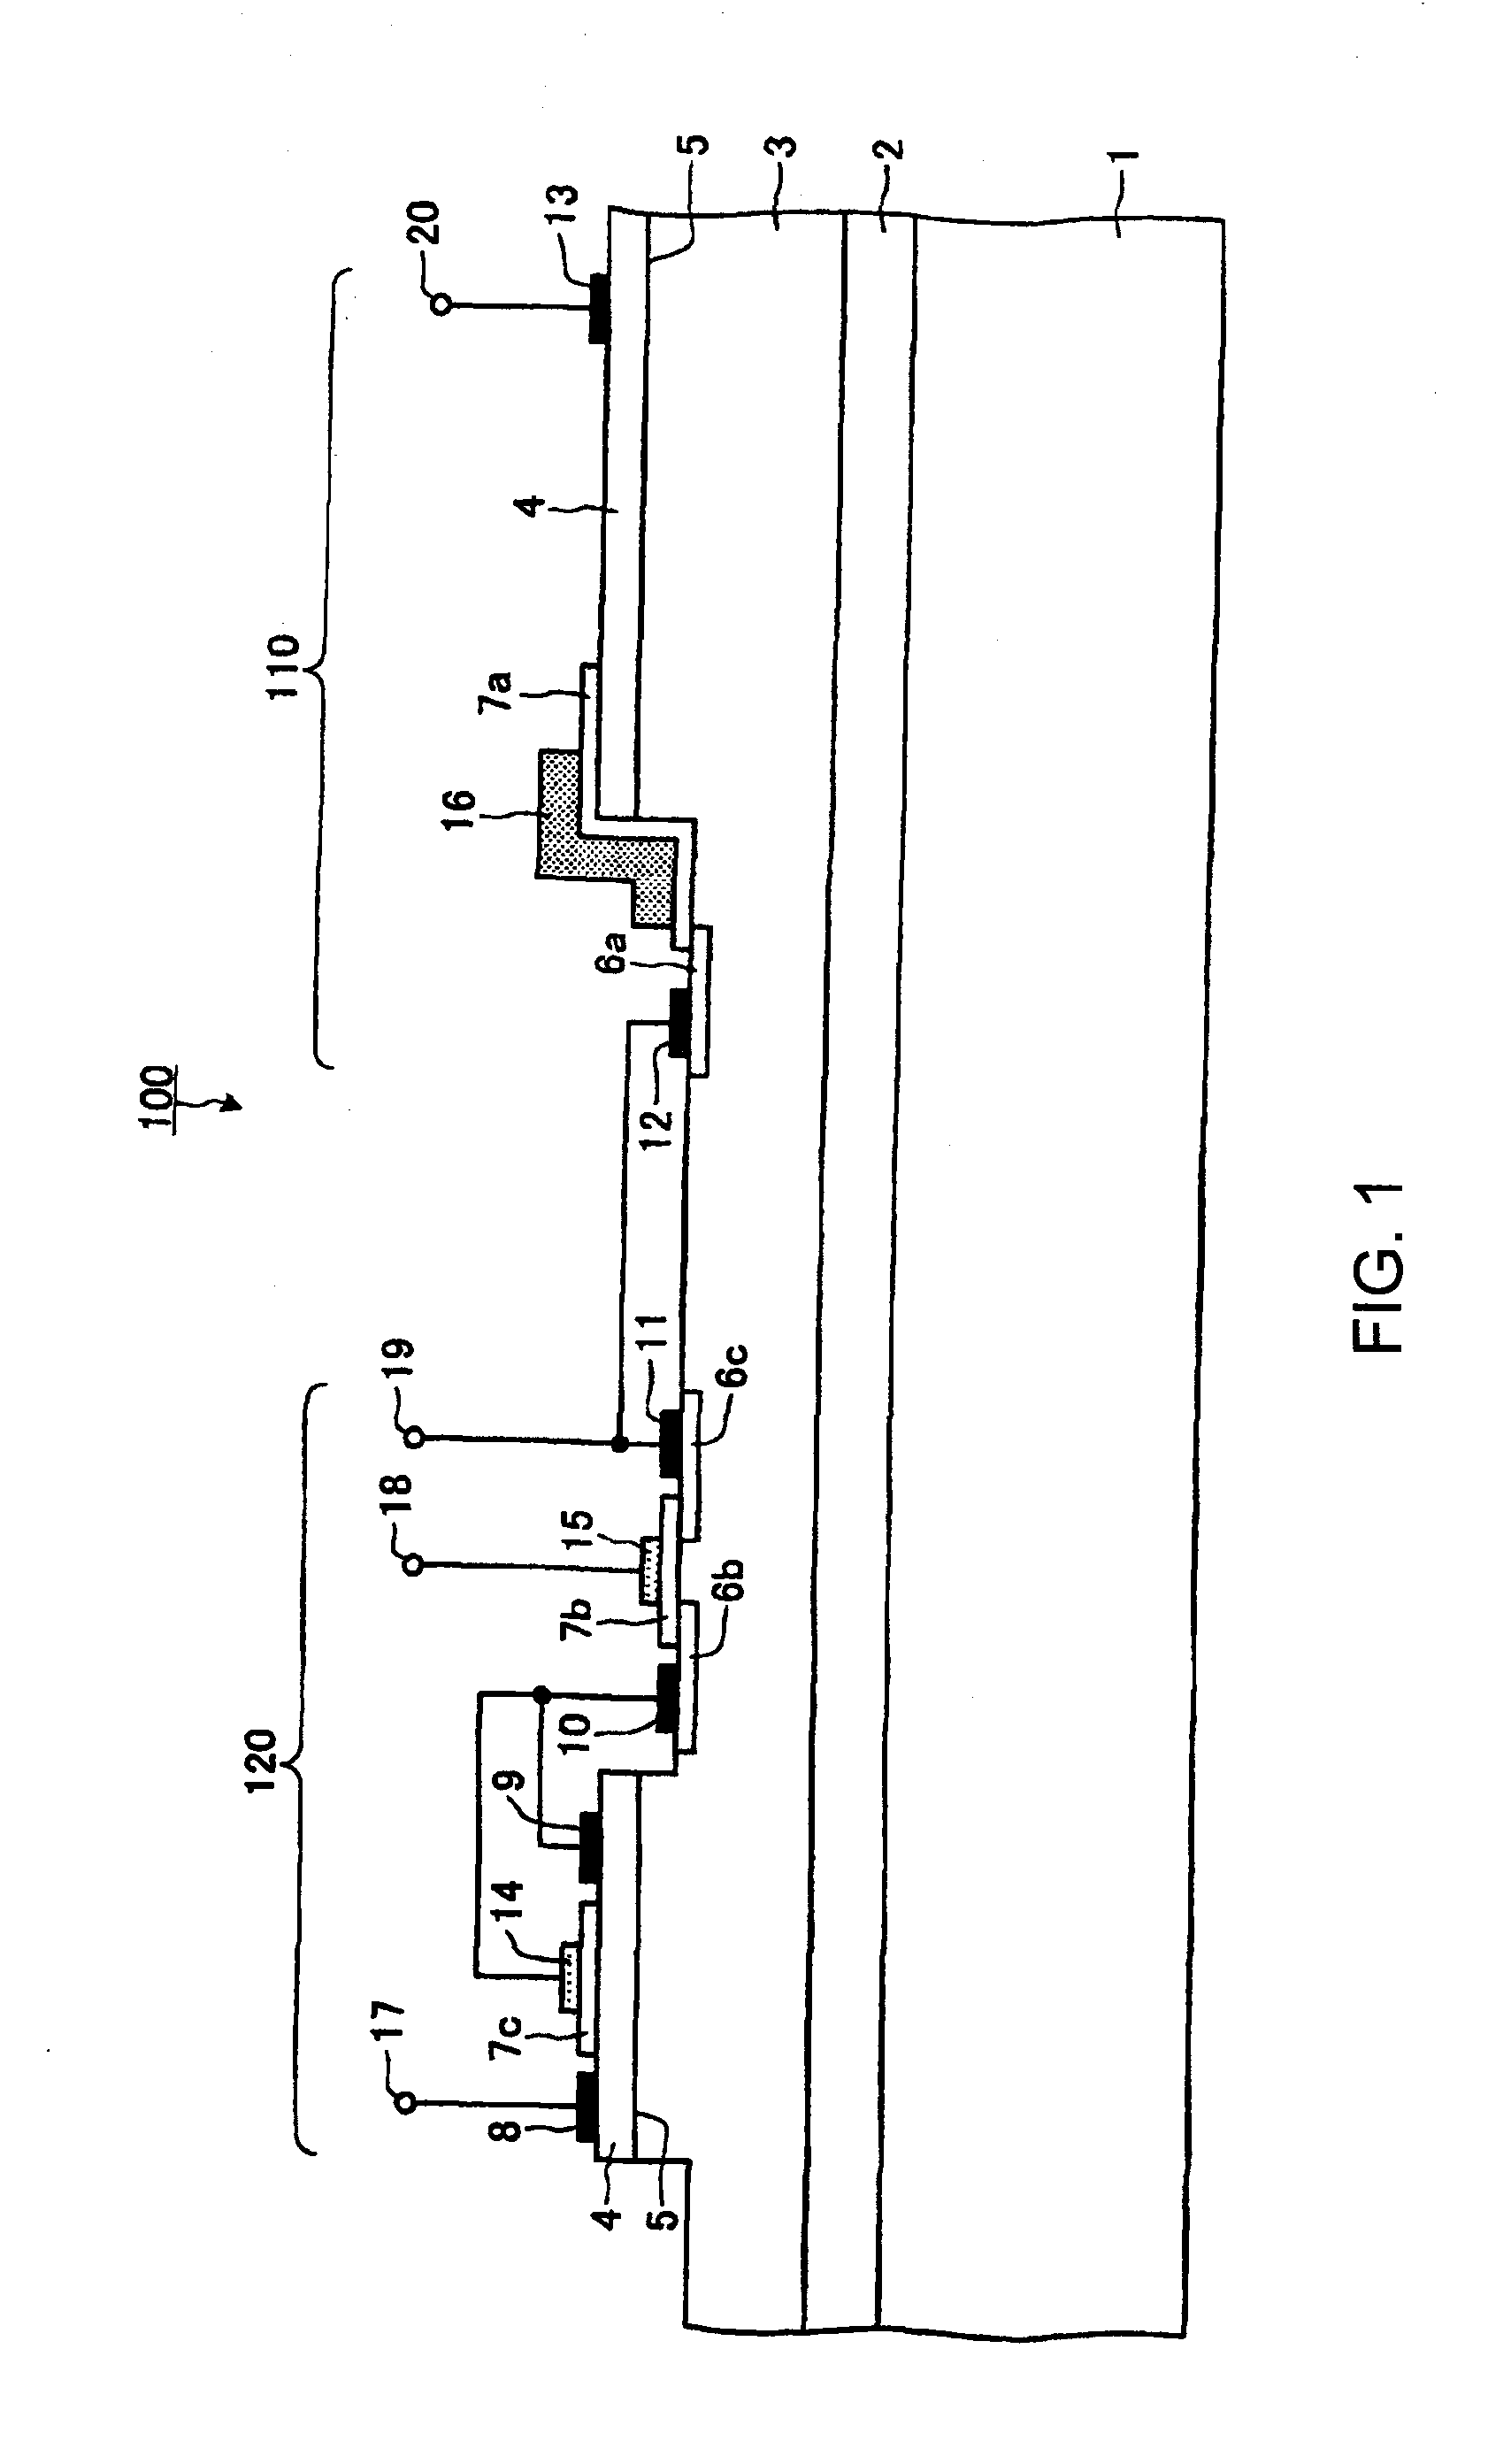 Gallium nitride semiconductor device and method for producing the same